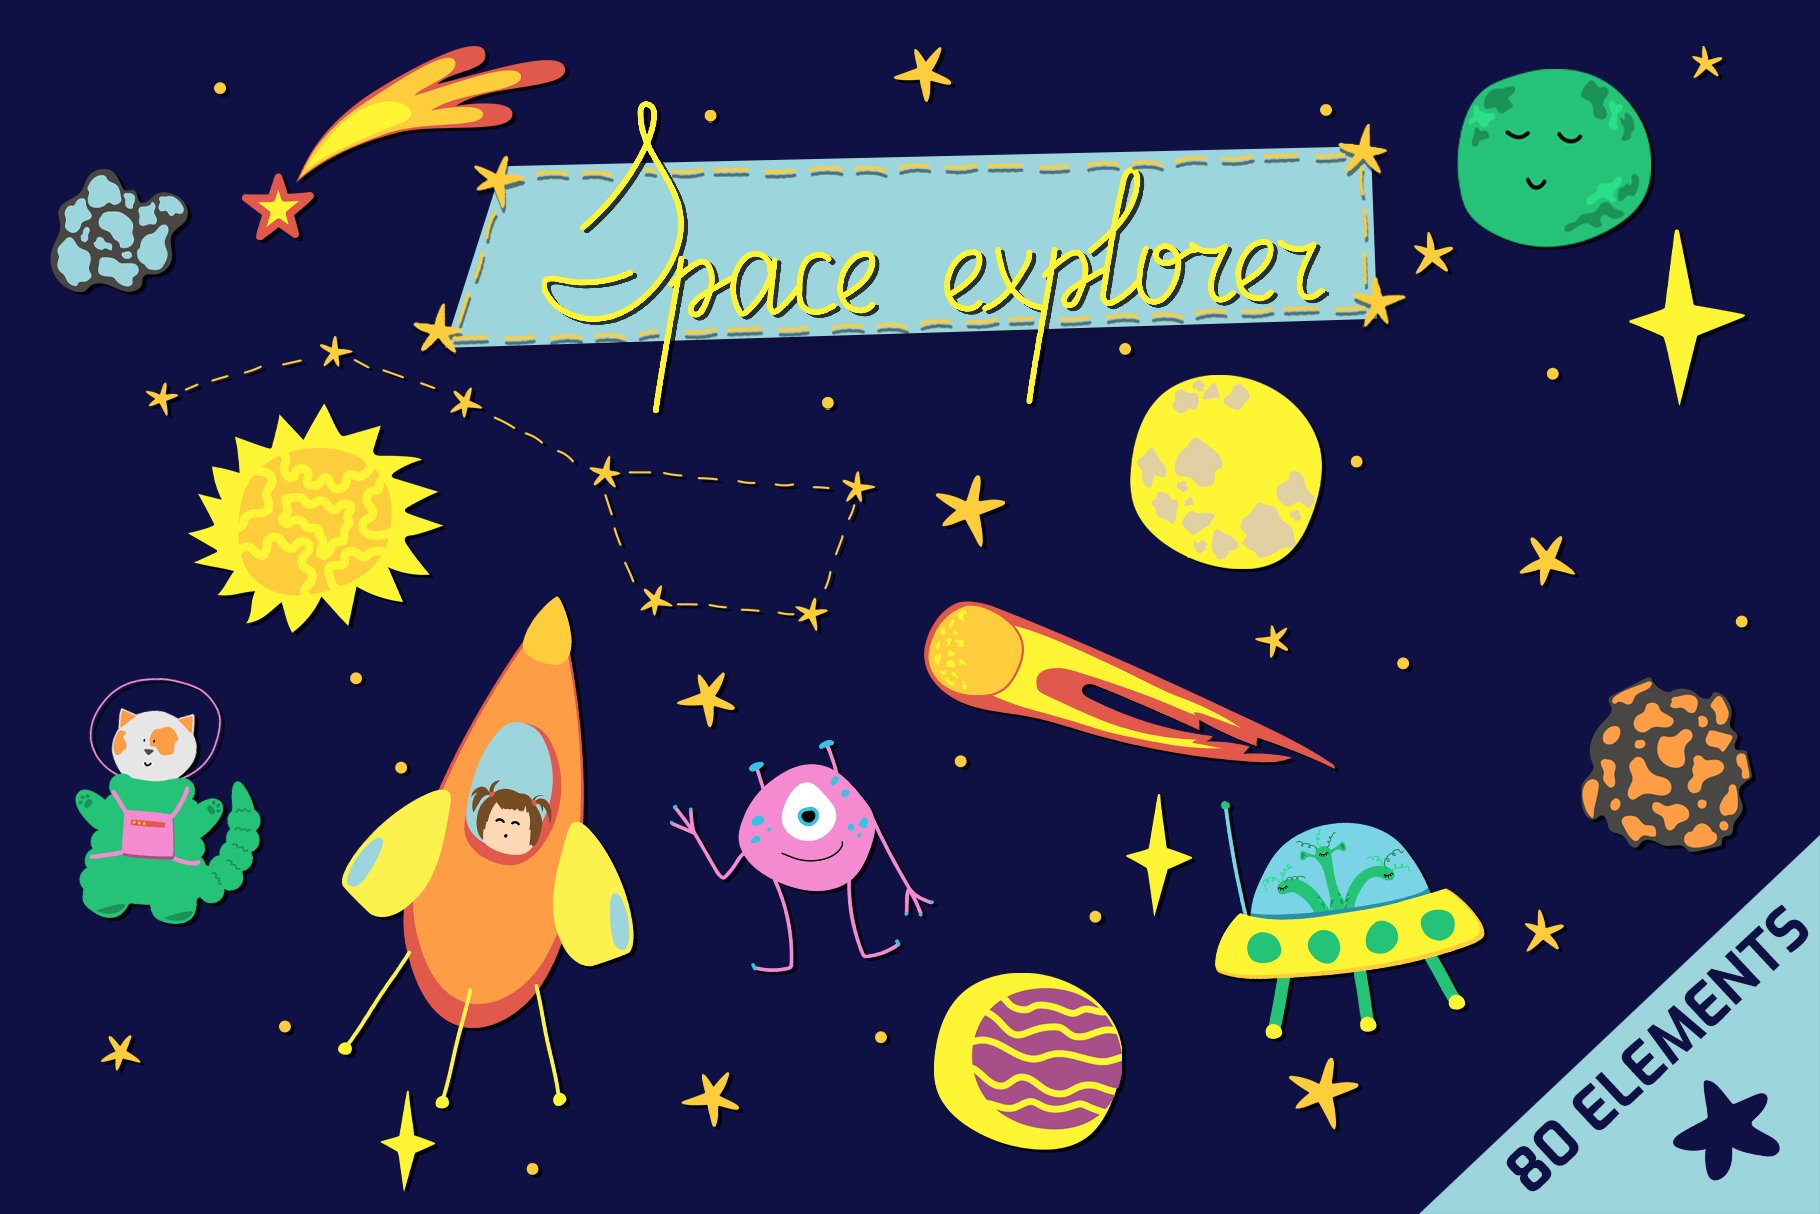 Space explorer cover image.